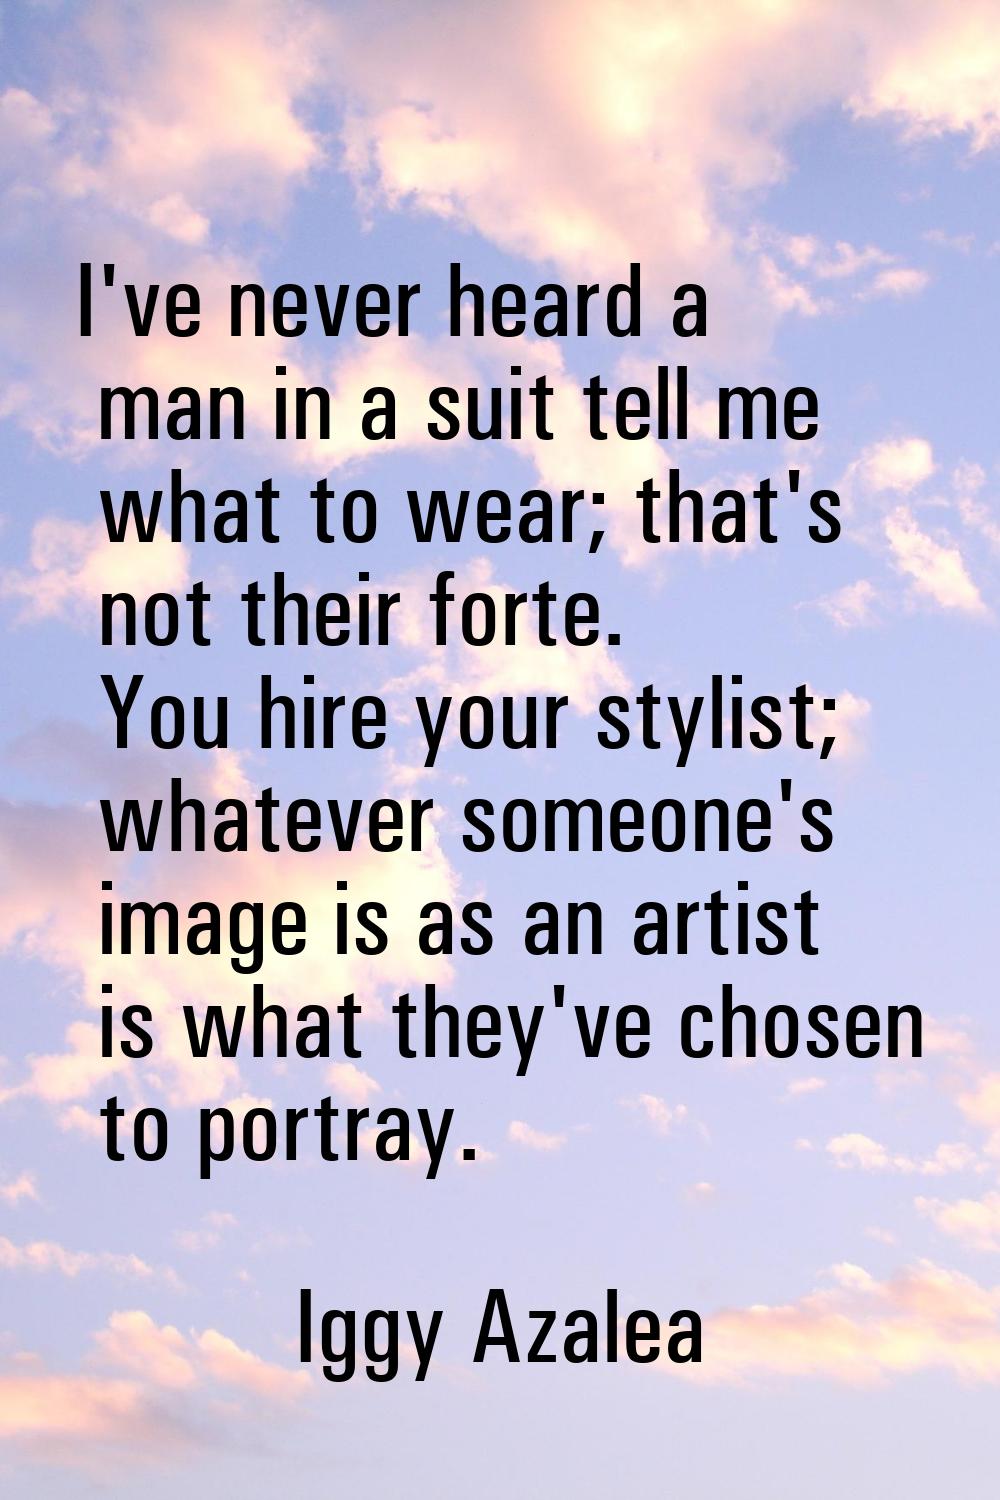 I've never heard a man in a suit tell me what to wear; that's not their forte. You hire your stylis